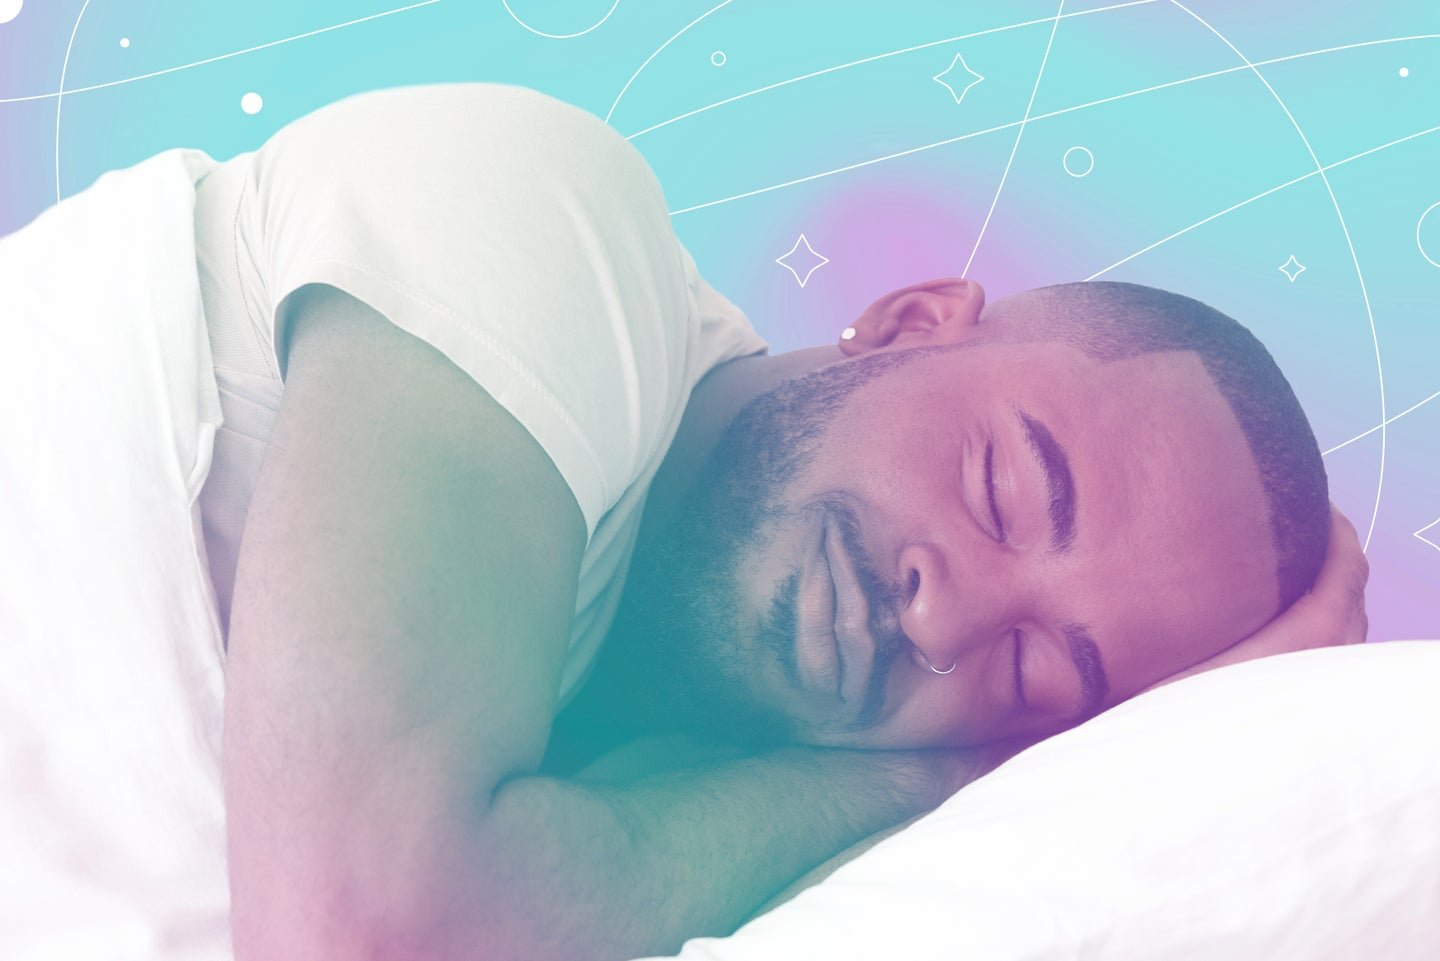 Take the best naps, with science